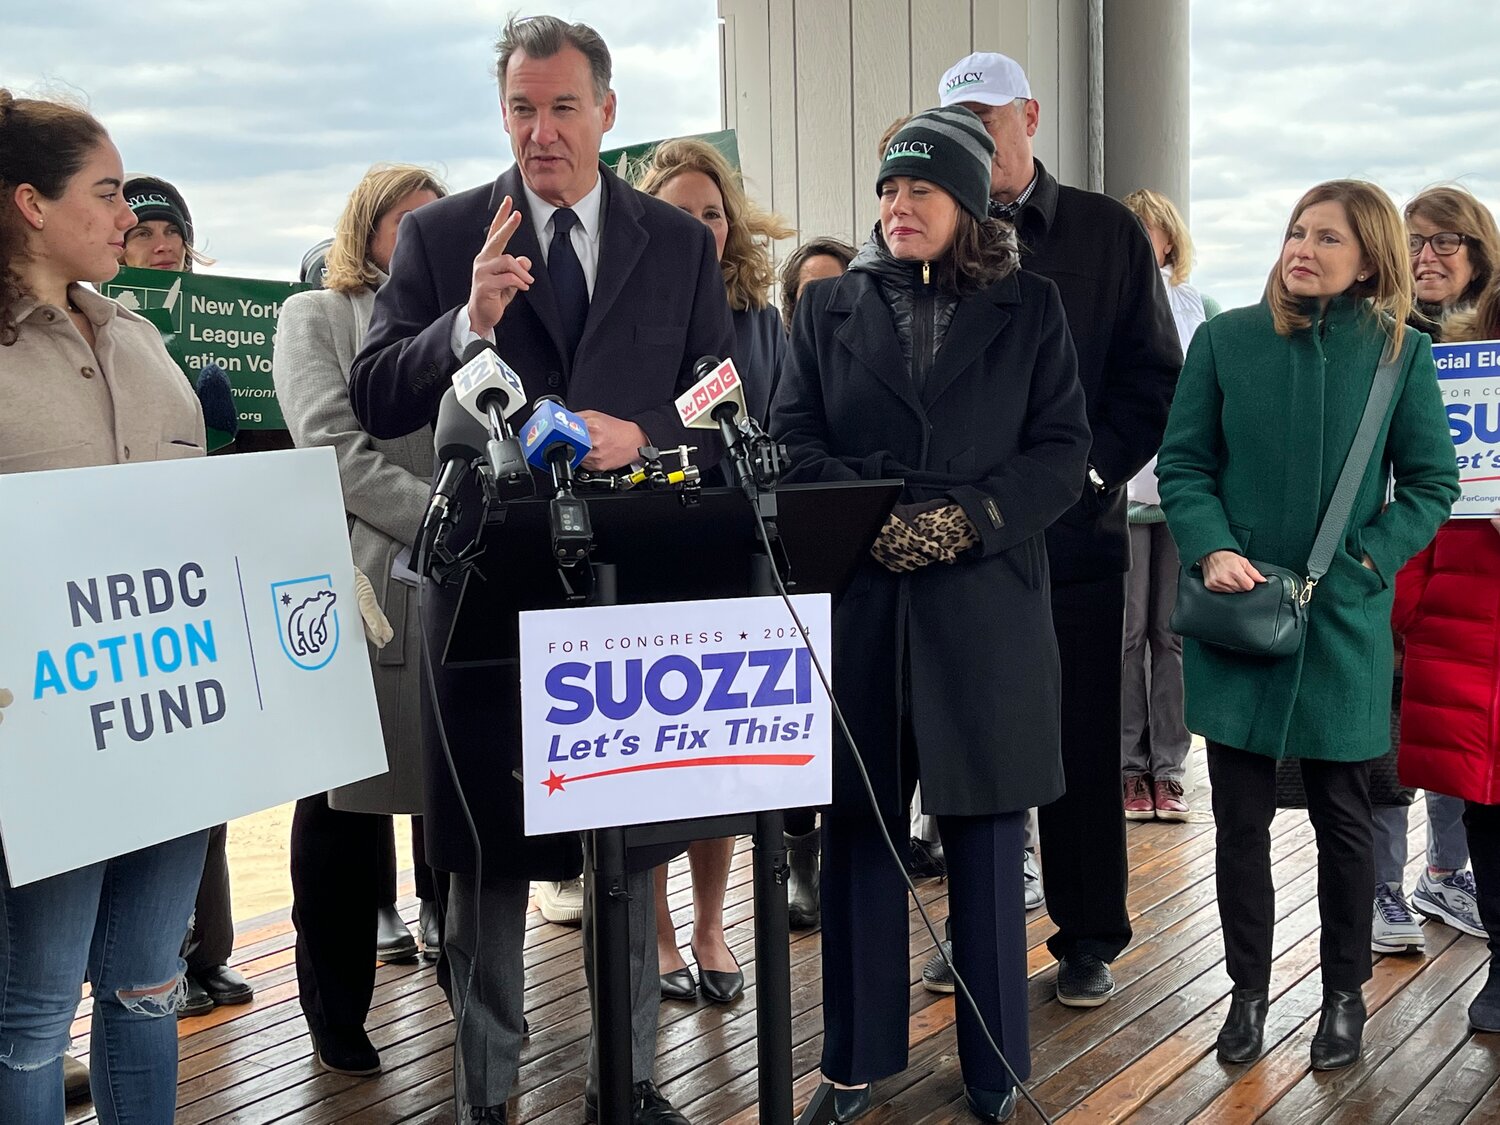 Former Congressman Tom Suozzi was joined by the leaders and members of several environmental organizations, who endorsed him for his strong stance on climate change and wildlife and open space conservation.